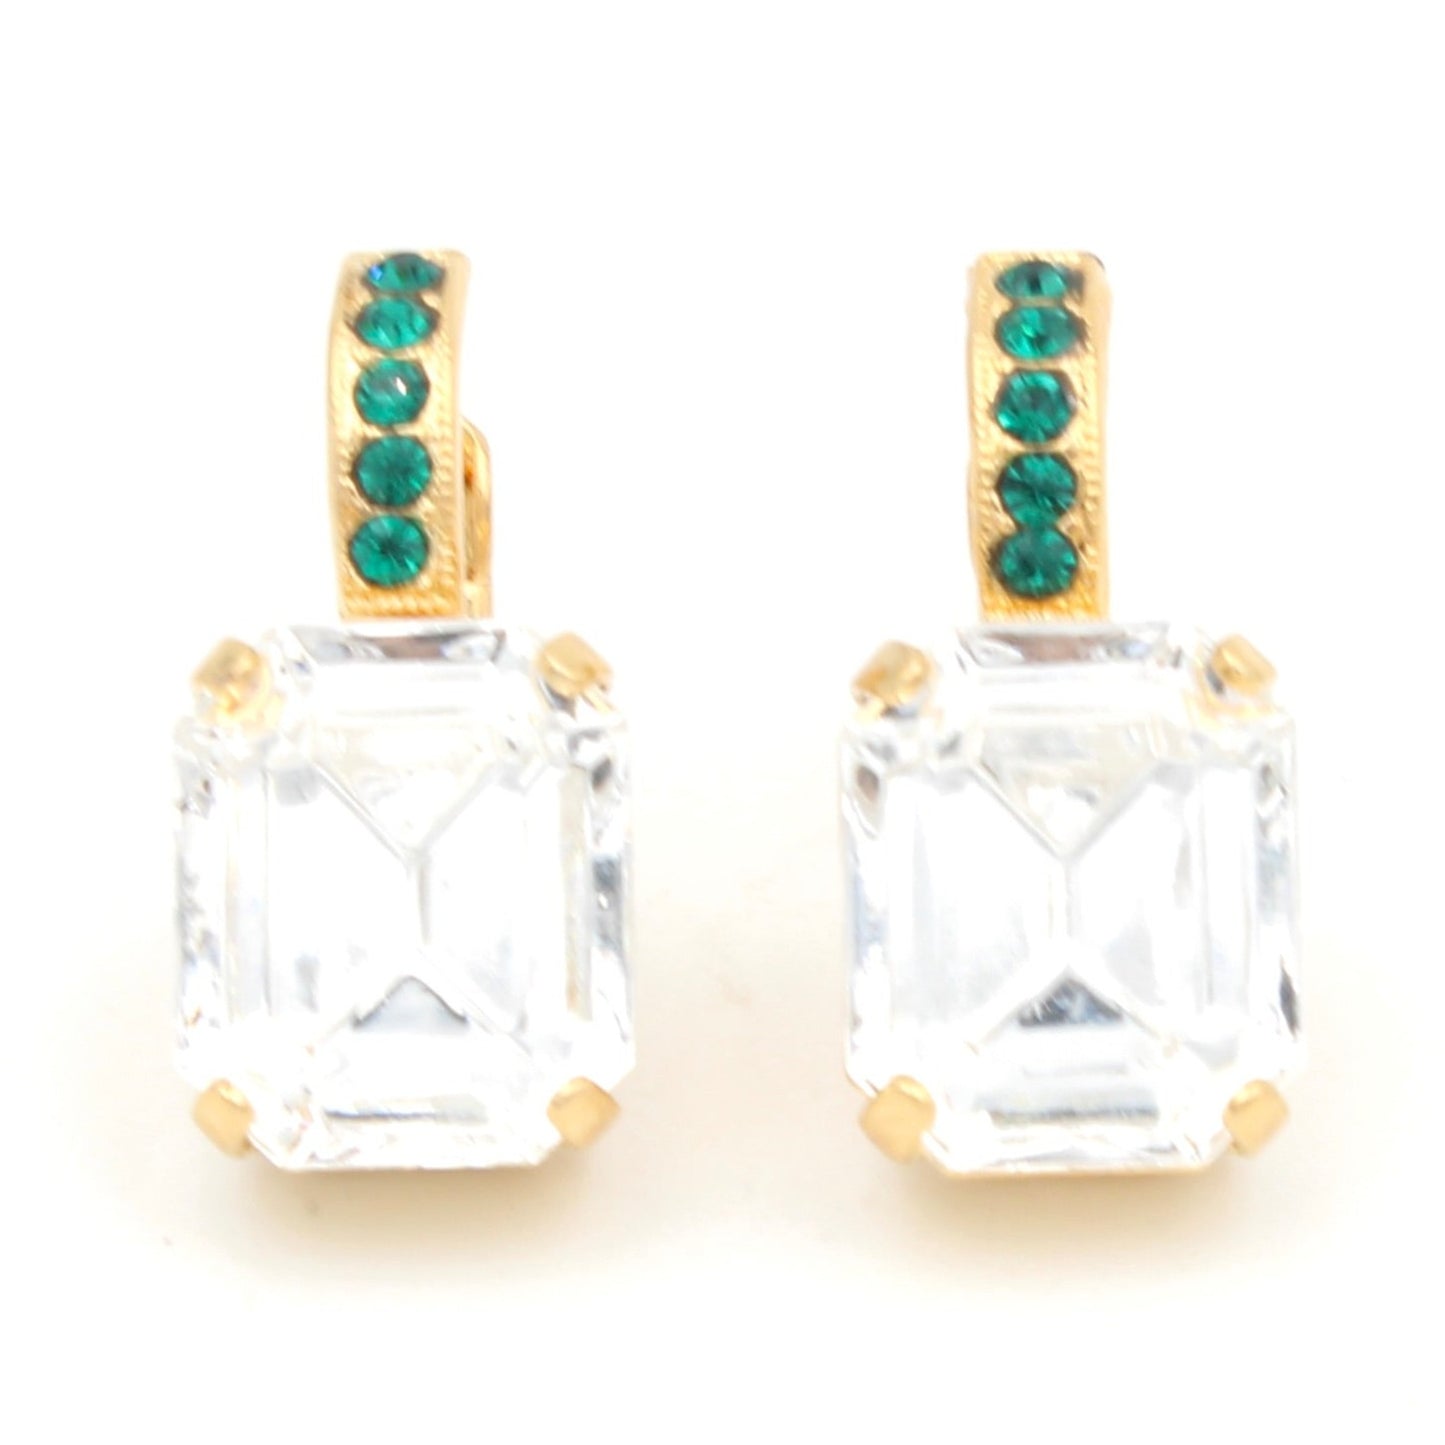 Clear Emerald Cut Earrings with Emerald Leverback in Yellow Gold - MaryTyke's